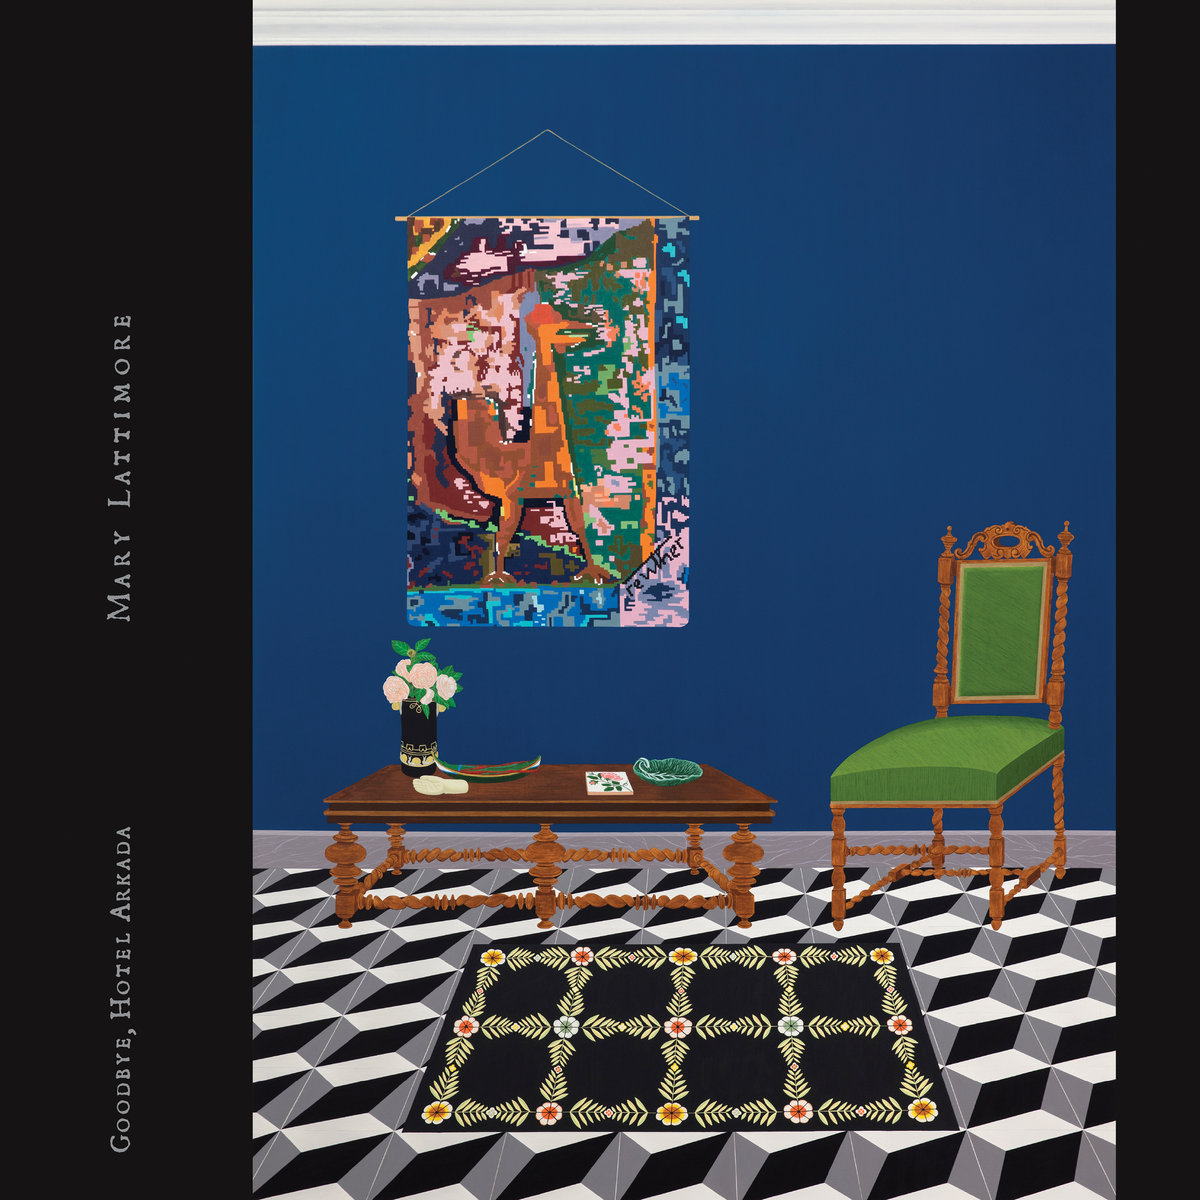 MARY LATTIMORE – GOODBYE, HOTEL ARKADA. out now